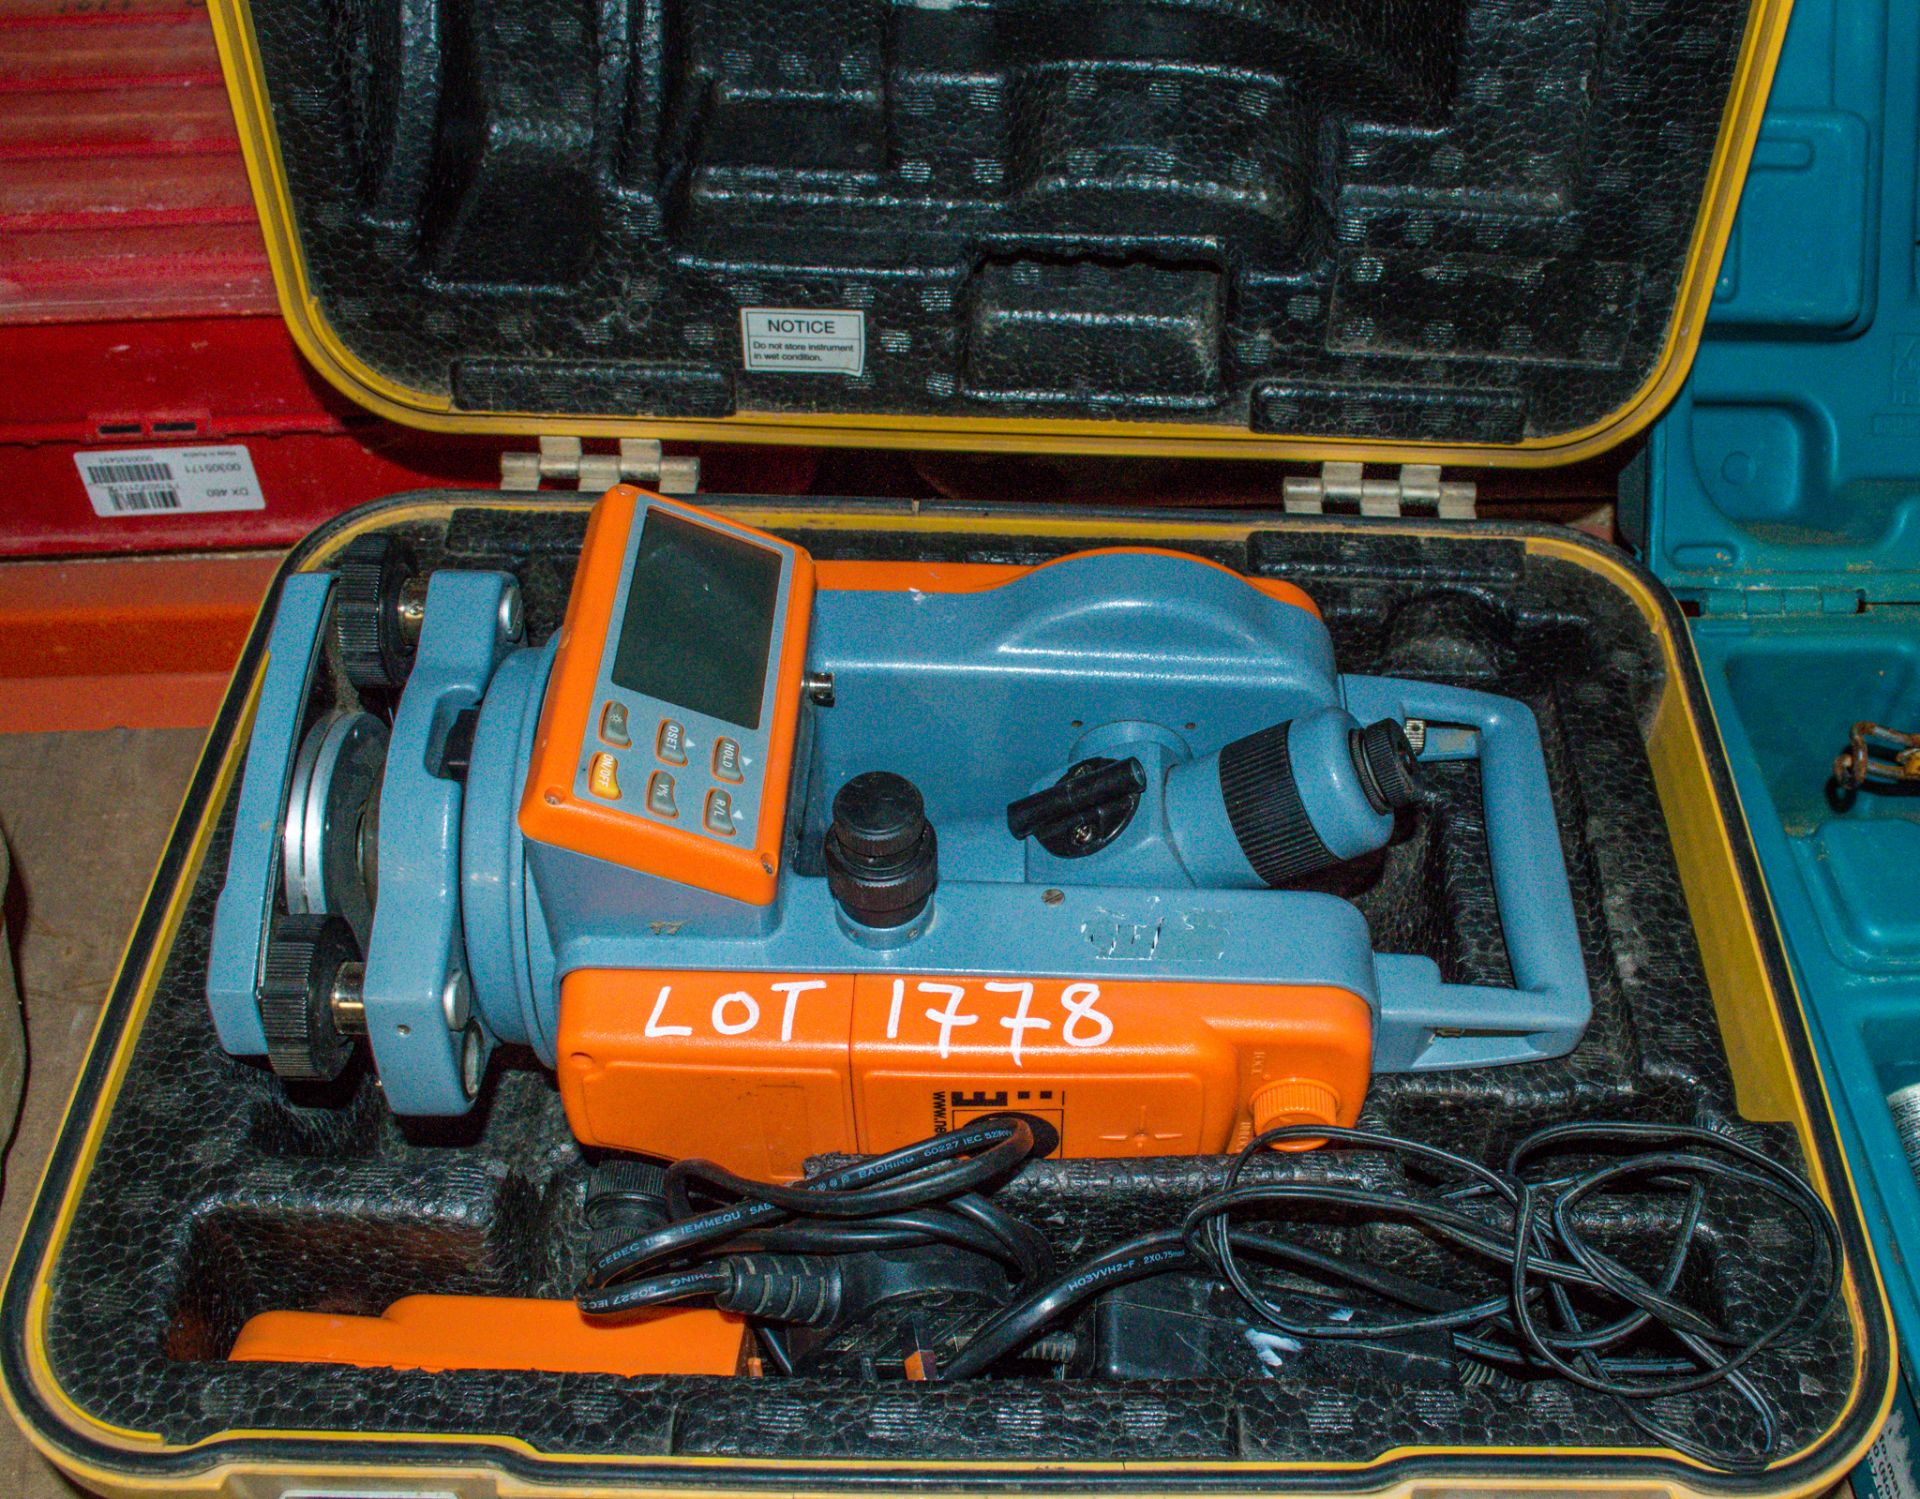 Nedo ET-5 total theodolite unit C/w 2 batteries, charger and carry case